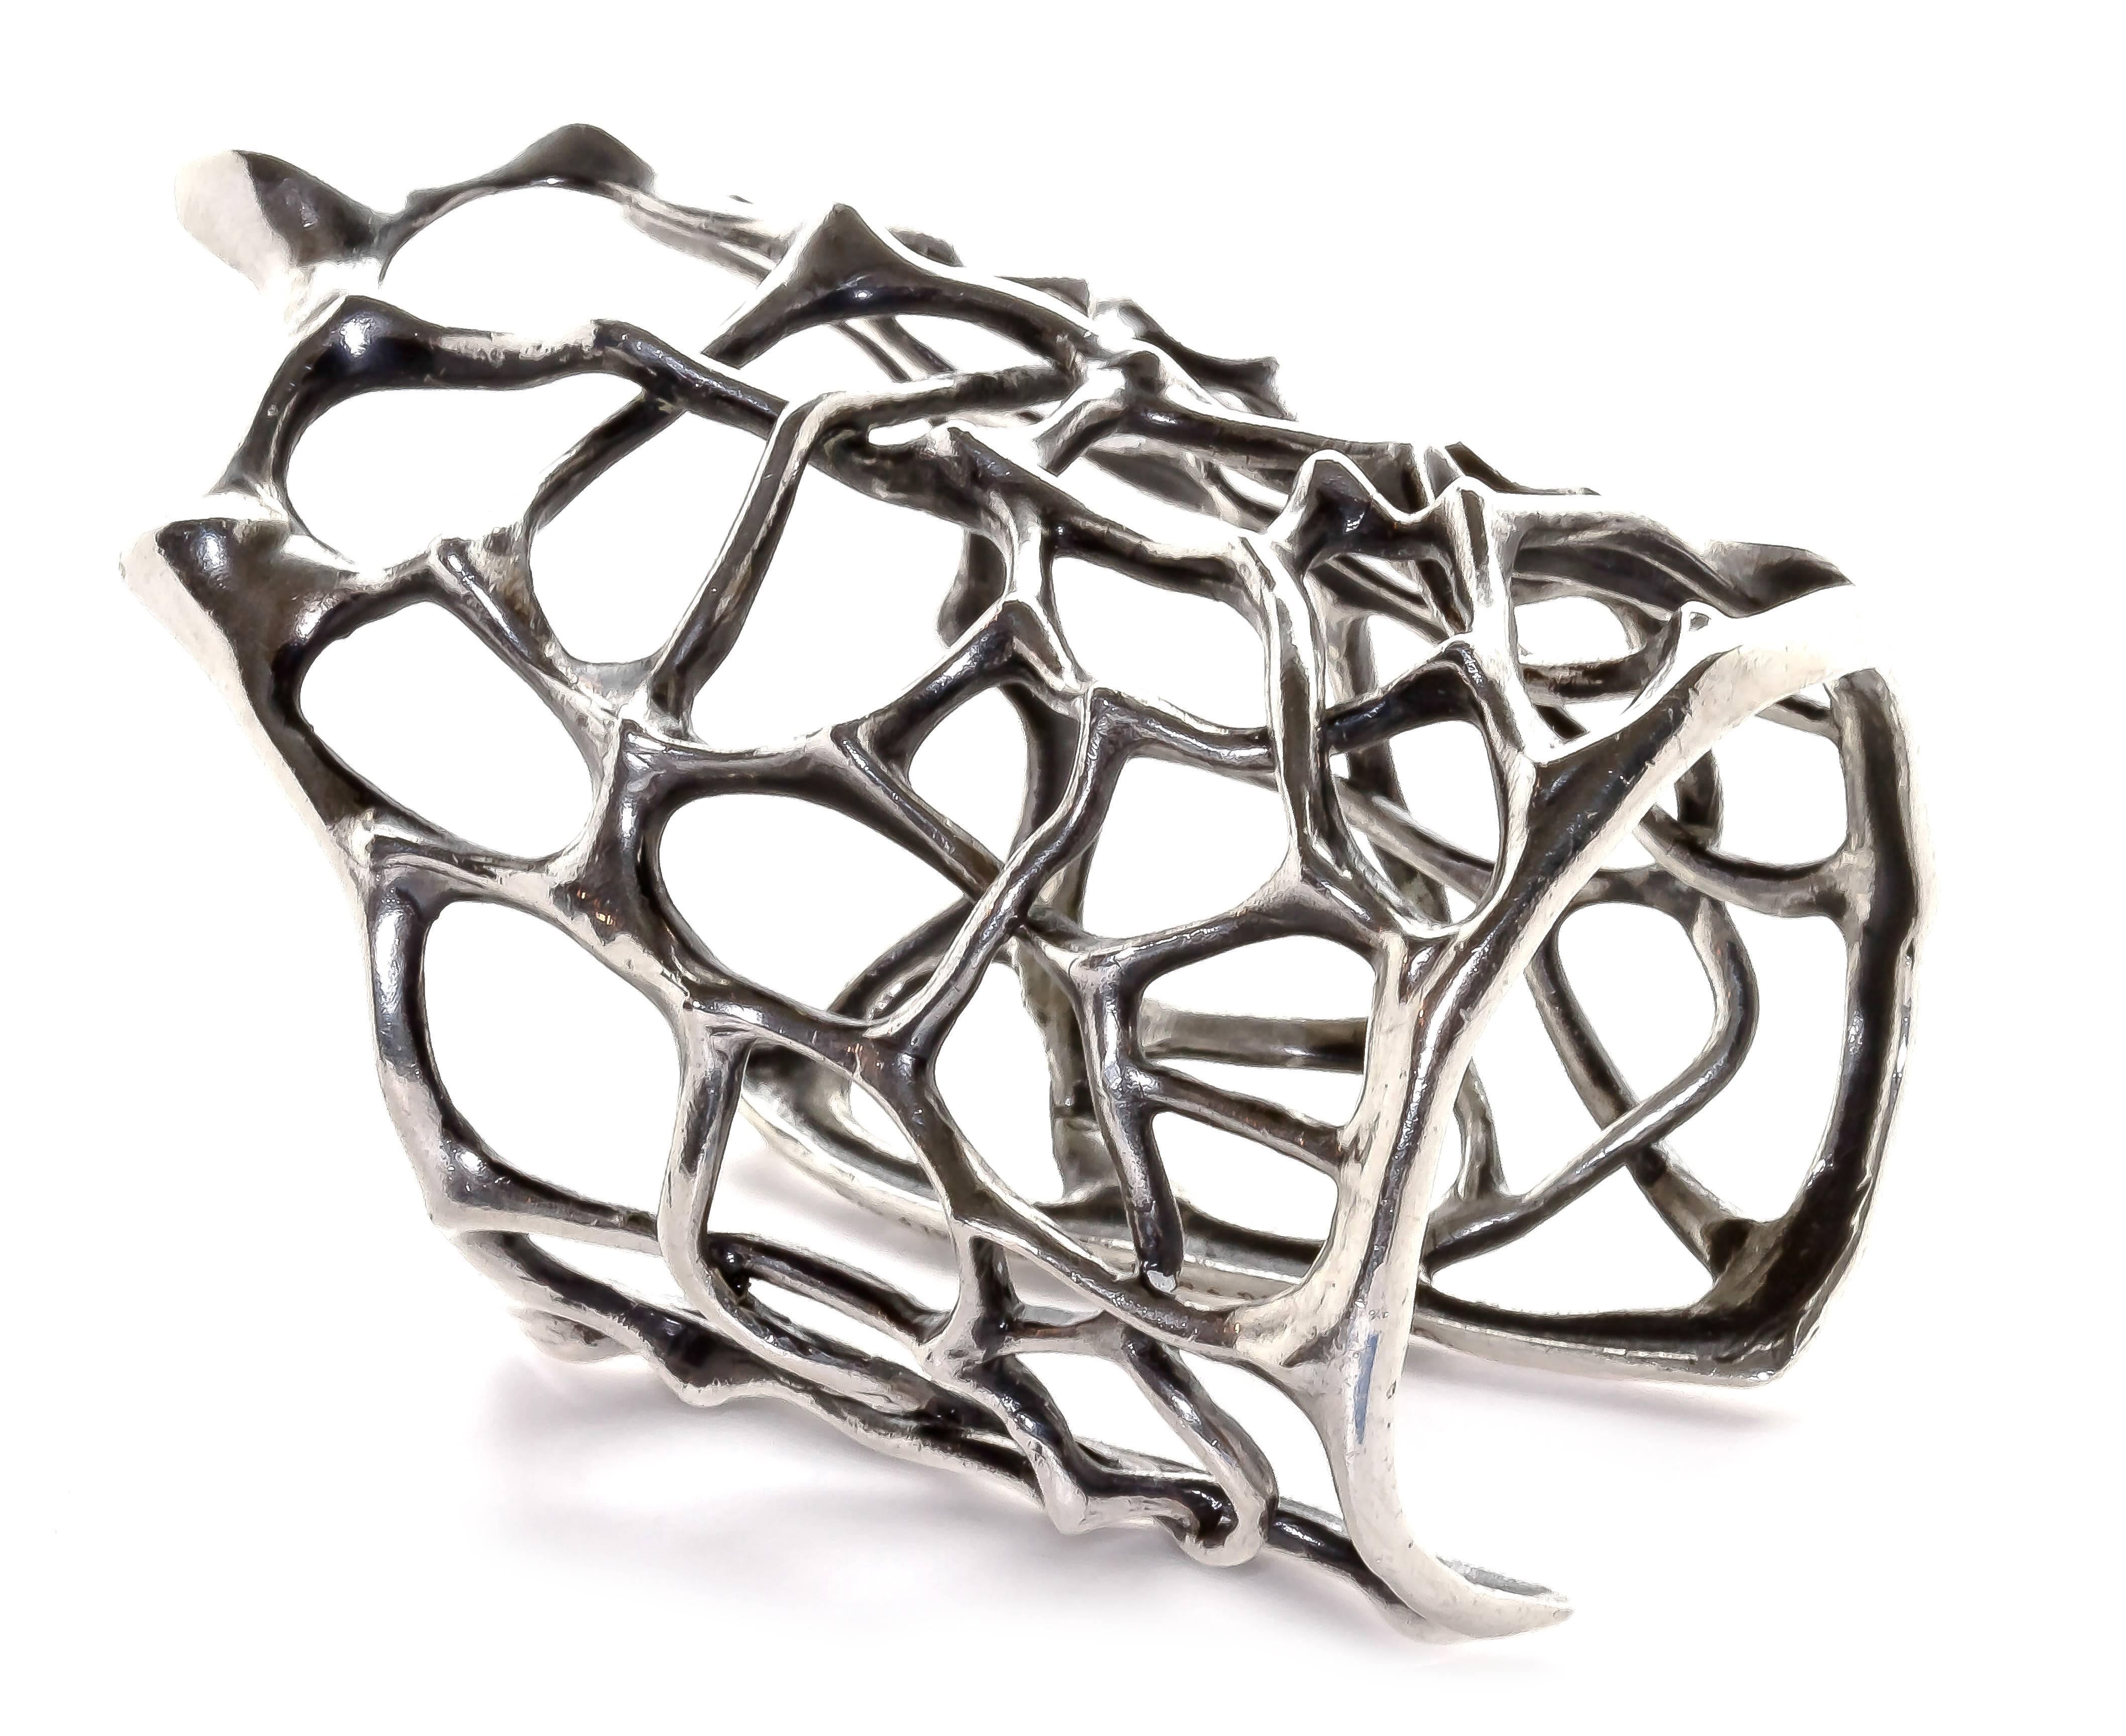 This sterling silver, thorn cuff arms the wearer with strength. This unique cuff is a limited edition John Brevard piece that evokes the interconnectedness of the natural world. The cuff is part of Brevard’s Morphogen Series. The Morphogen Series